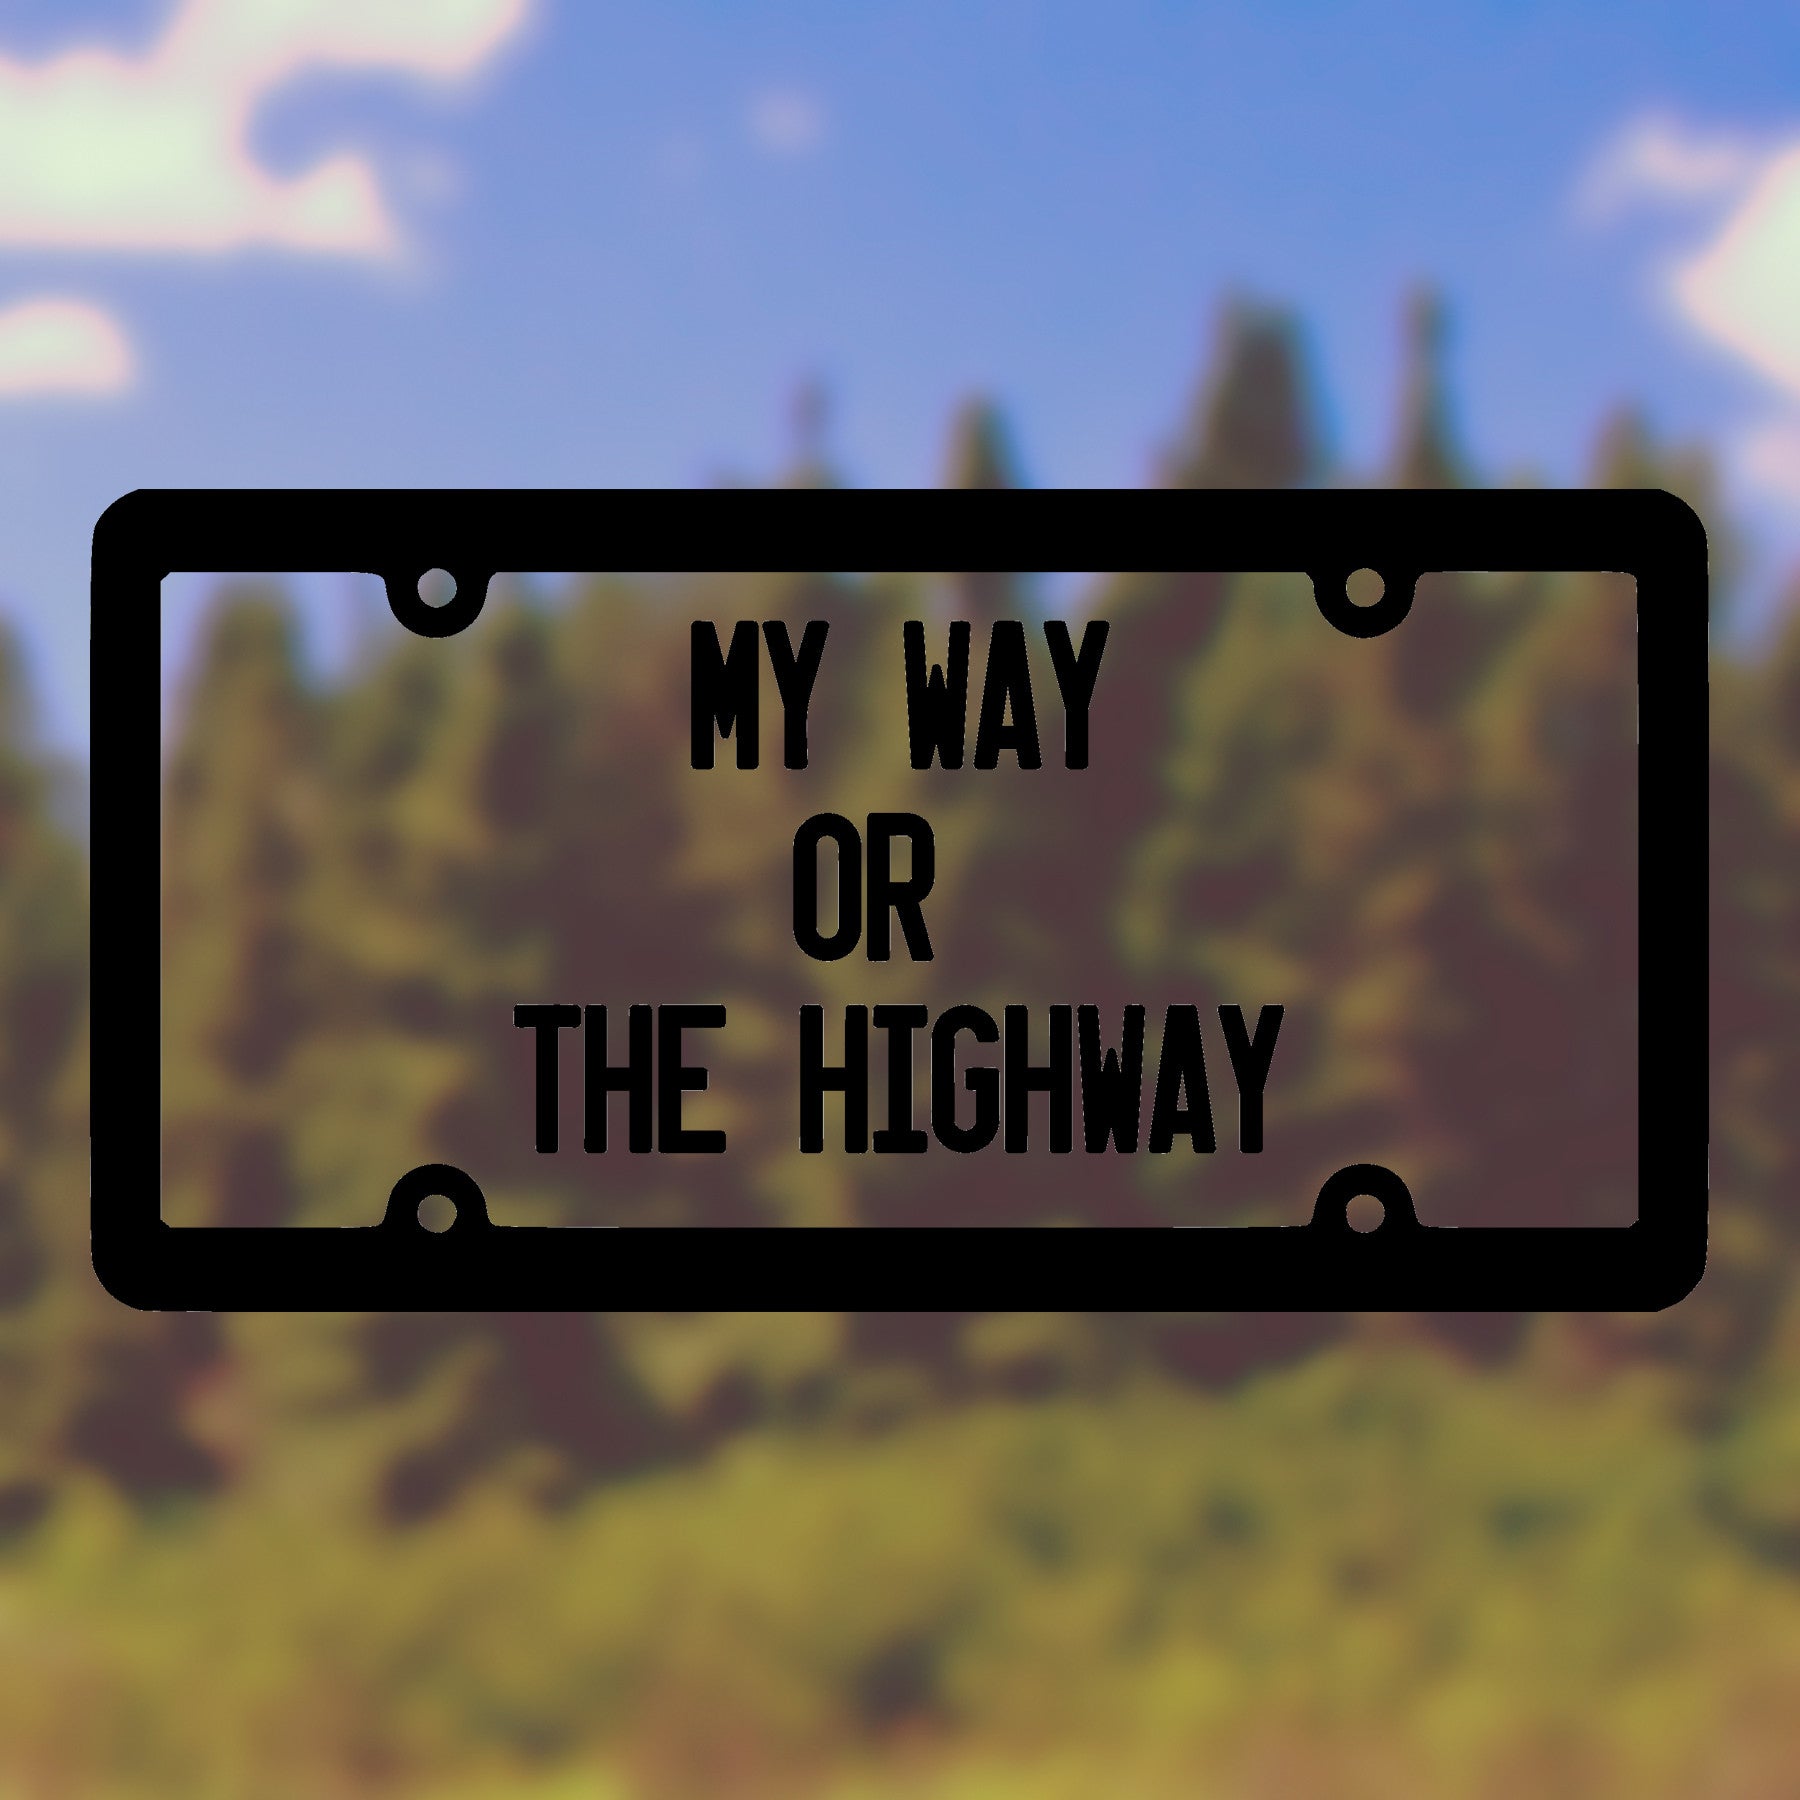 My way or the highway | Bumper sticker - Adnil Creations